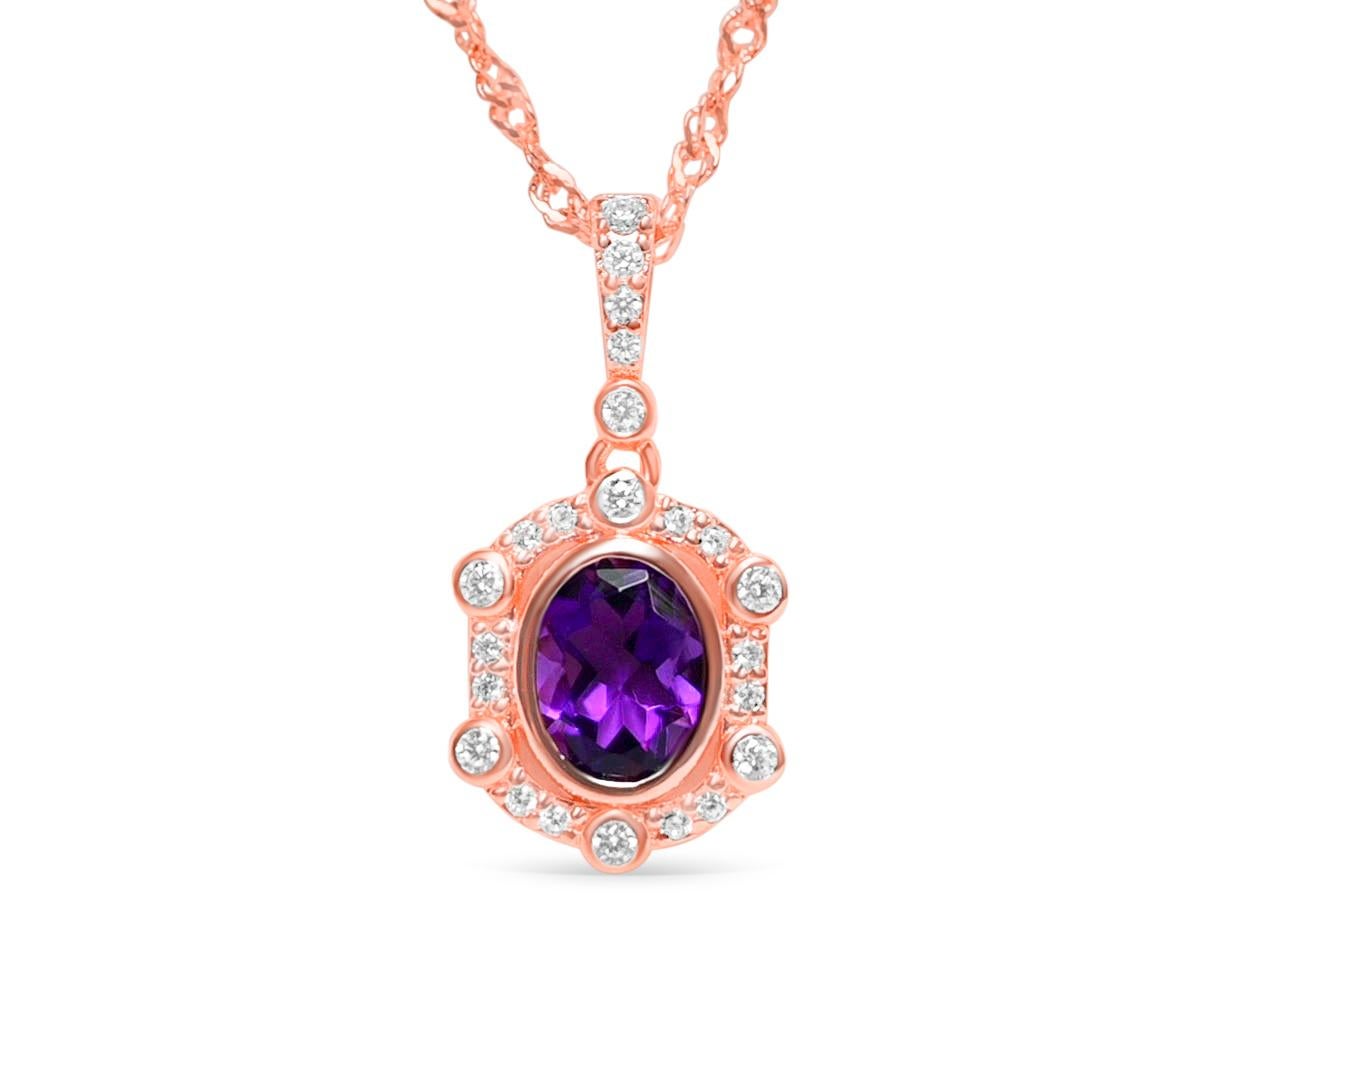 Women's Woman Wedding Amethyst Pendant Necklace 1.04 ct 18K Rose Gold Sterling Silver  For Sale